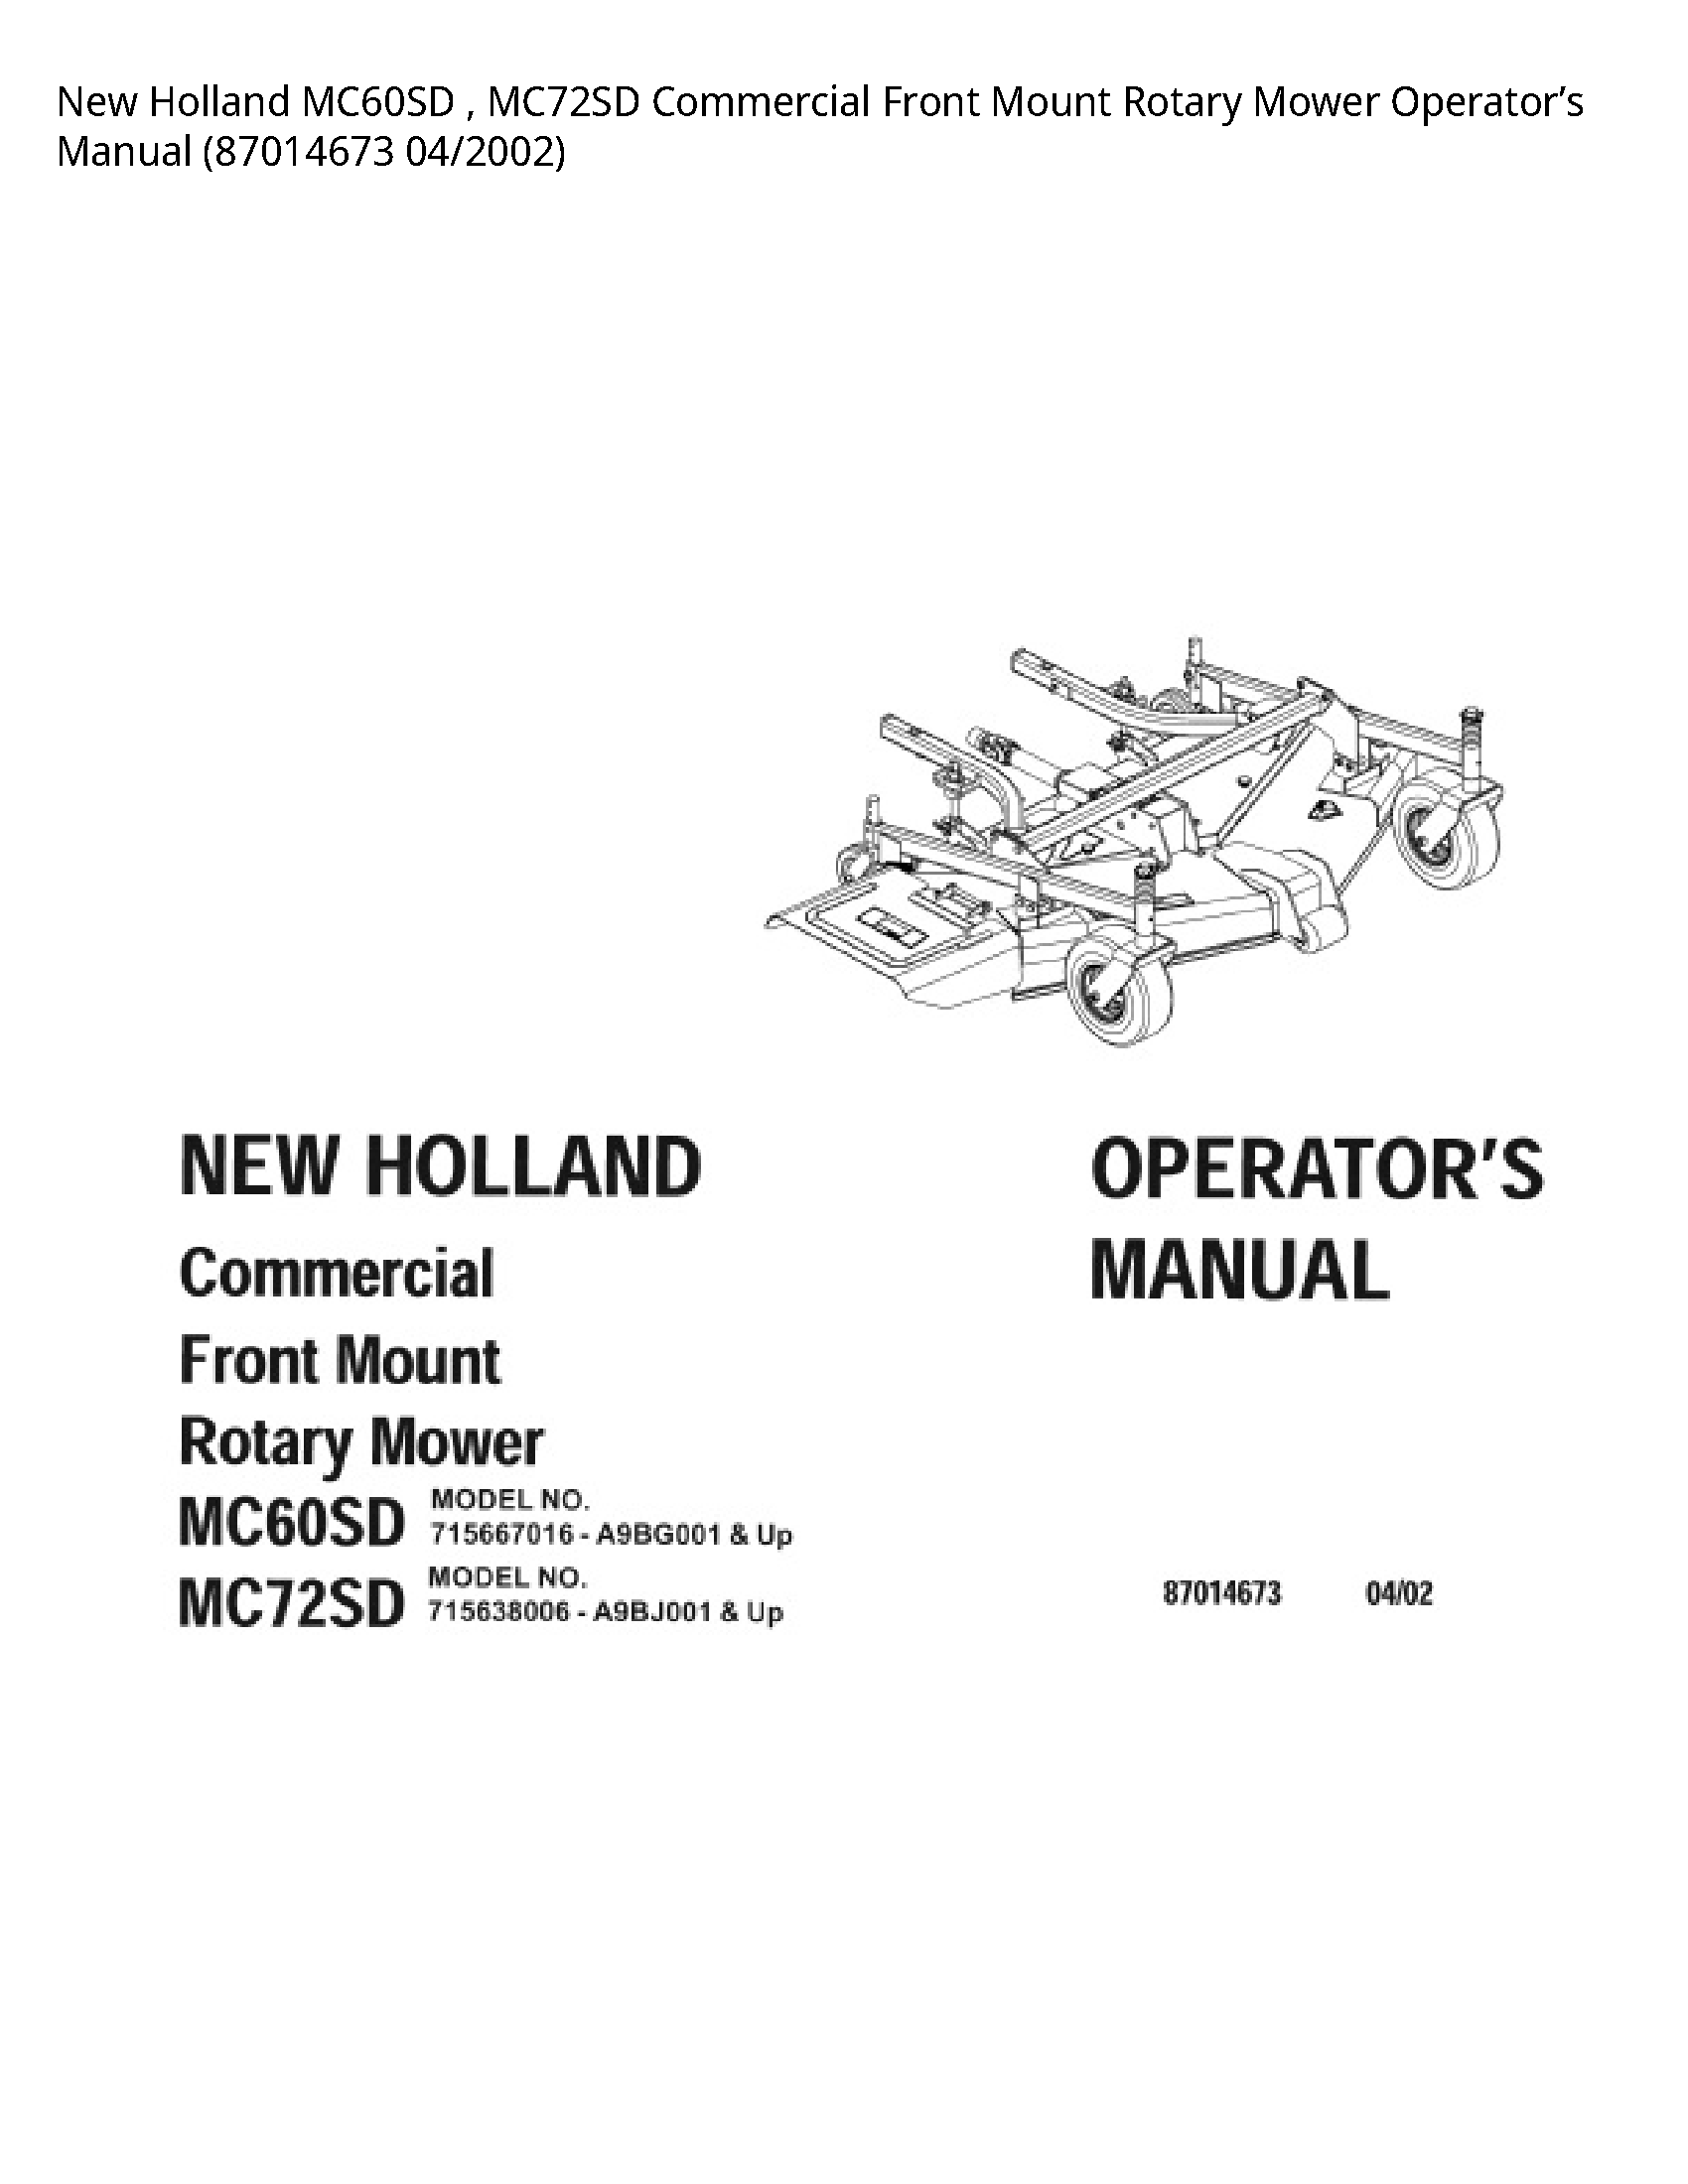 New Holland MC60SD Commercial Front Mount Rotary Mower Operator’s manual